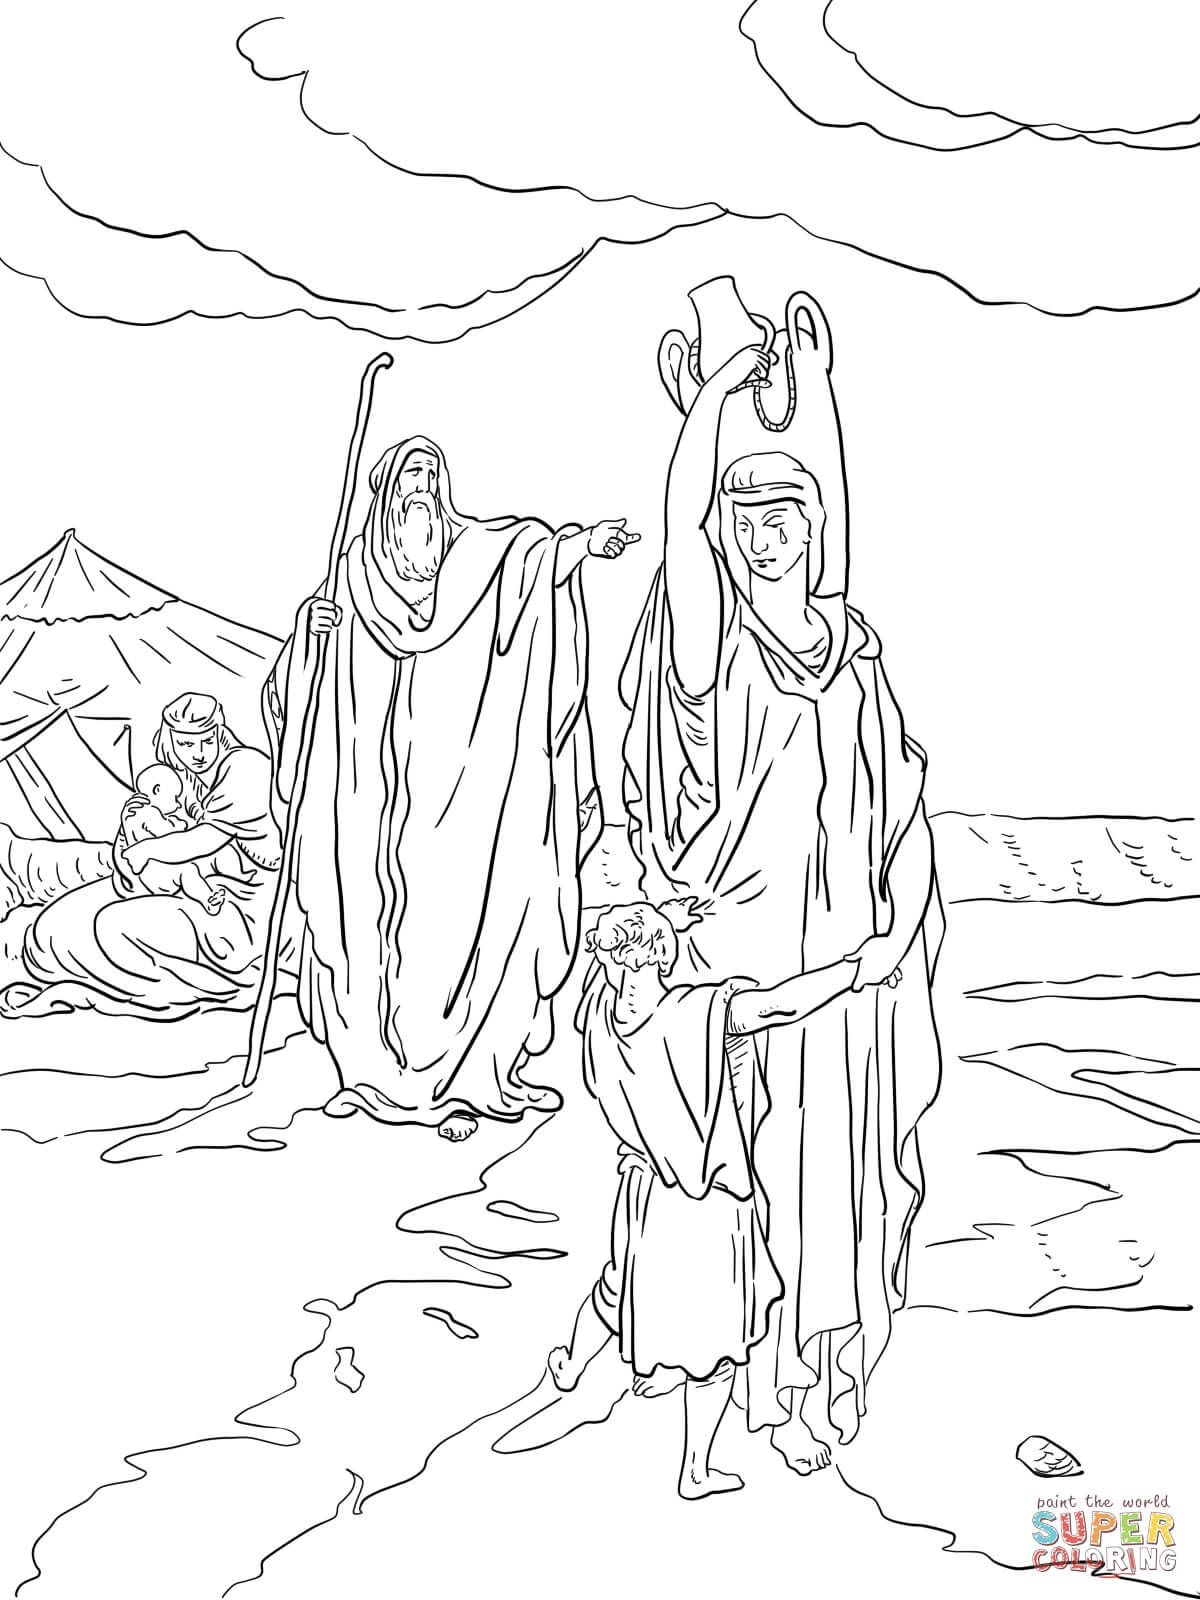 The Expulsion Of Hagar And Ishmael Coloring Page From Abraham - Free Printable Bible Characters Coloring Pages